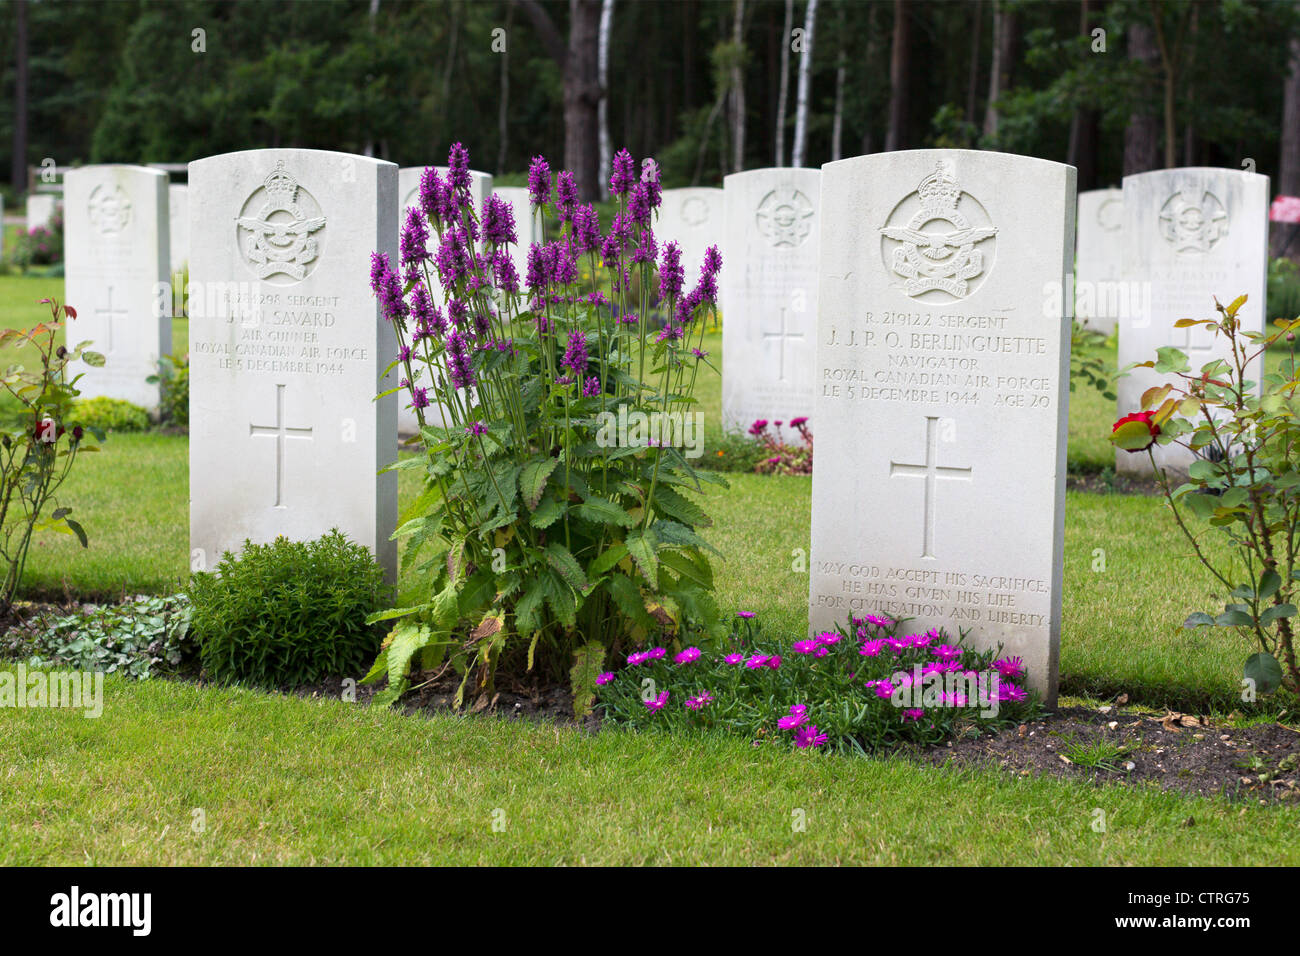 Flowers in bloom around the Royal Canadian Air Force military grave markers at Brookwood Cemetery Stock Photo